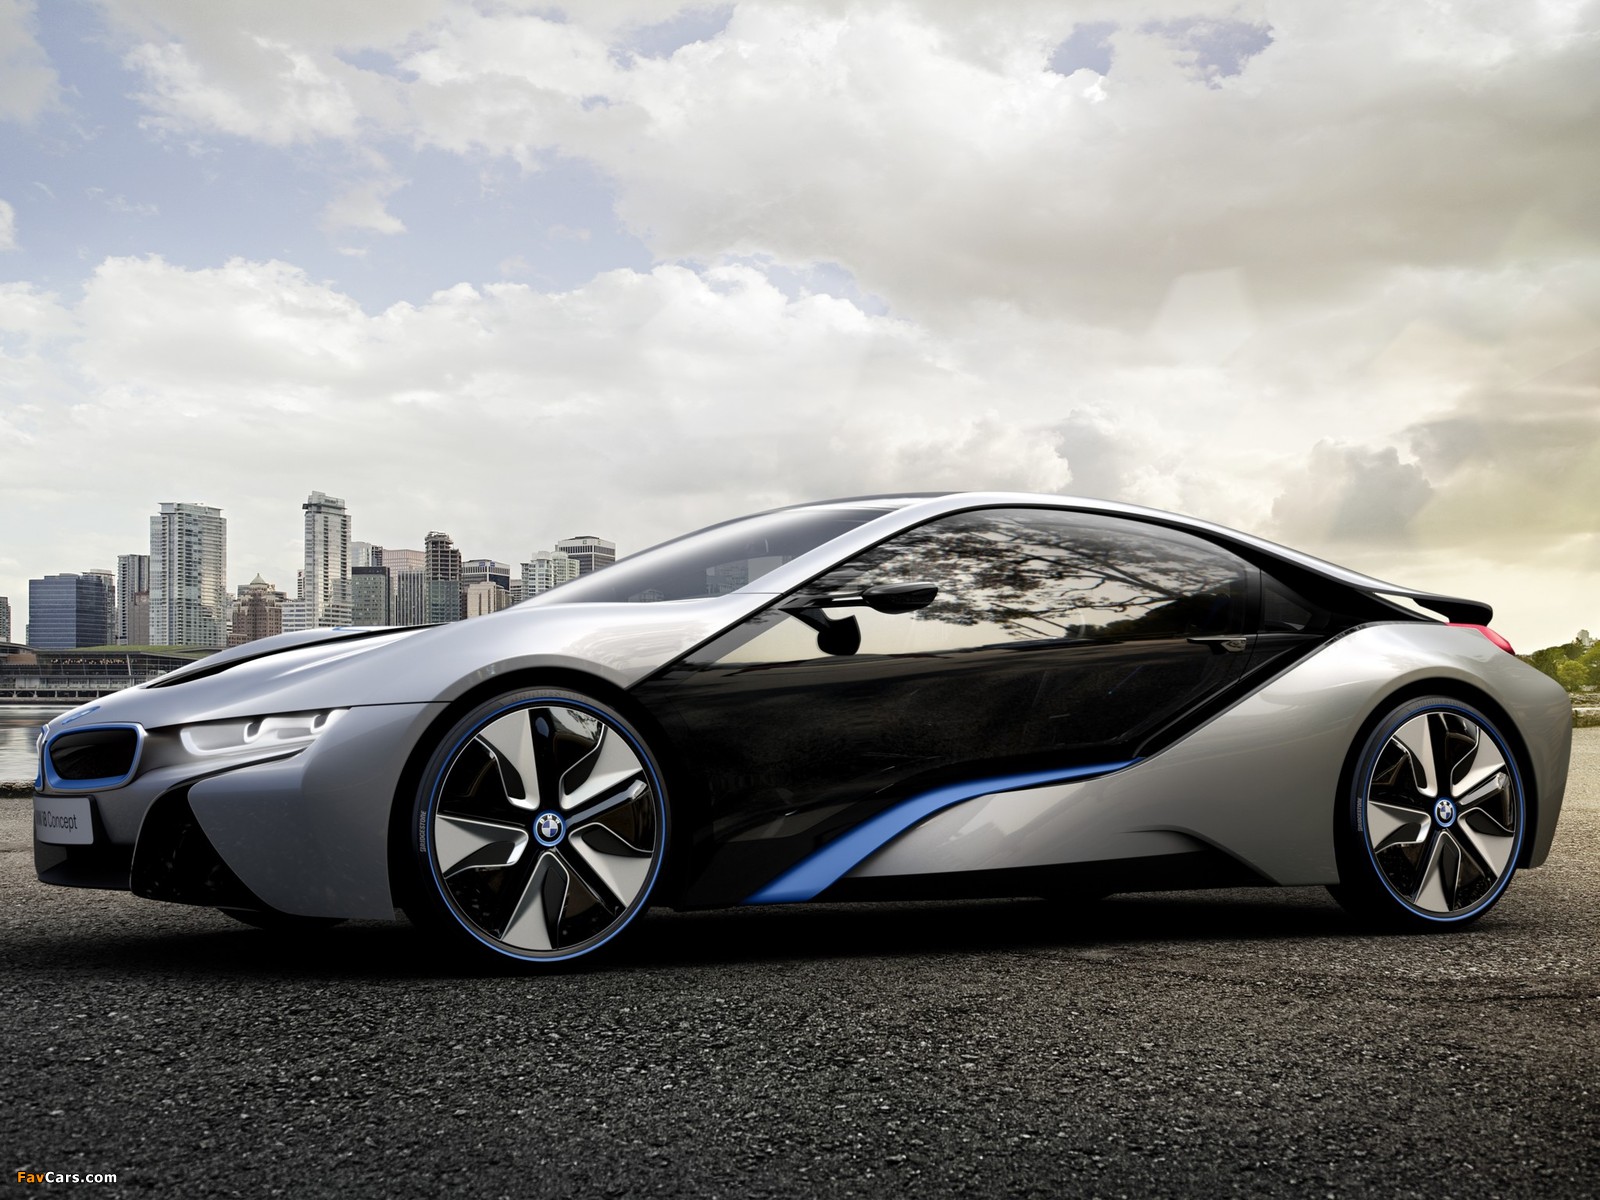 BMW i8 Concept 2011 pictures (1600 x 1200)